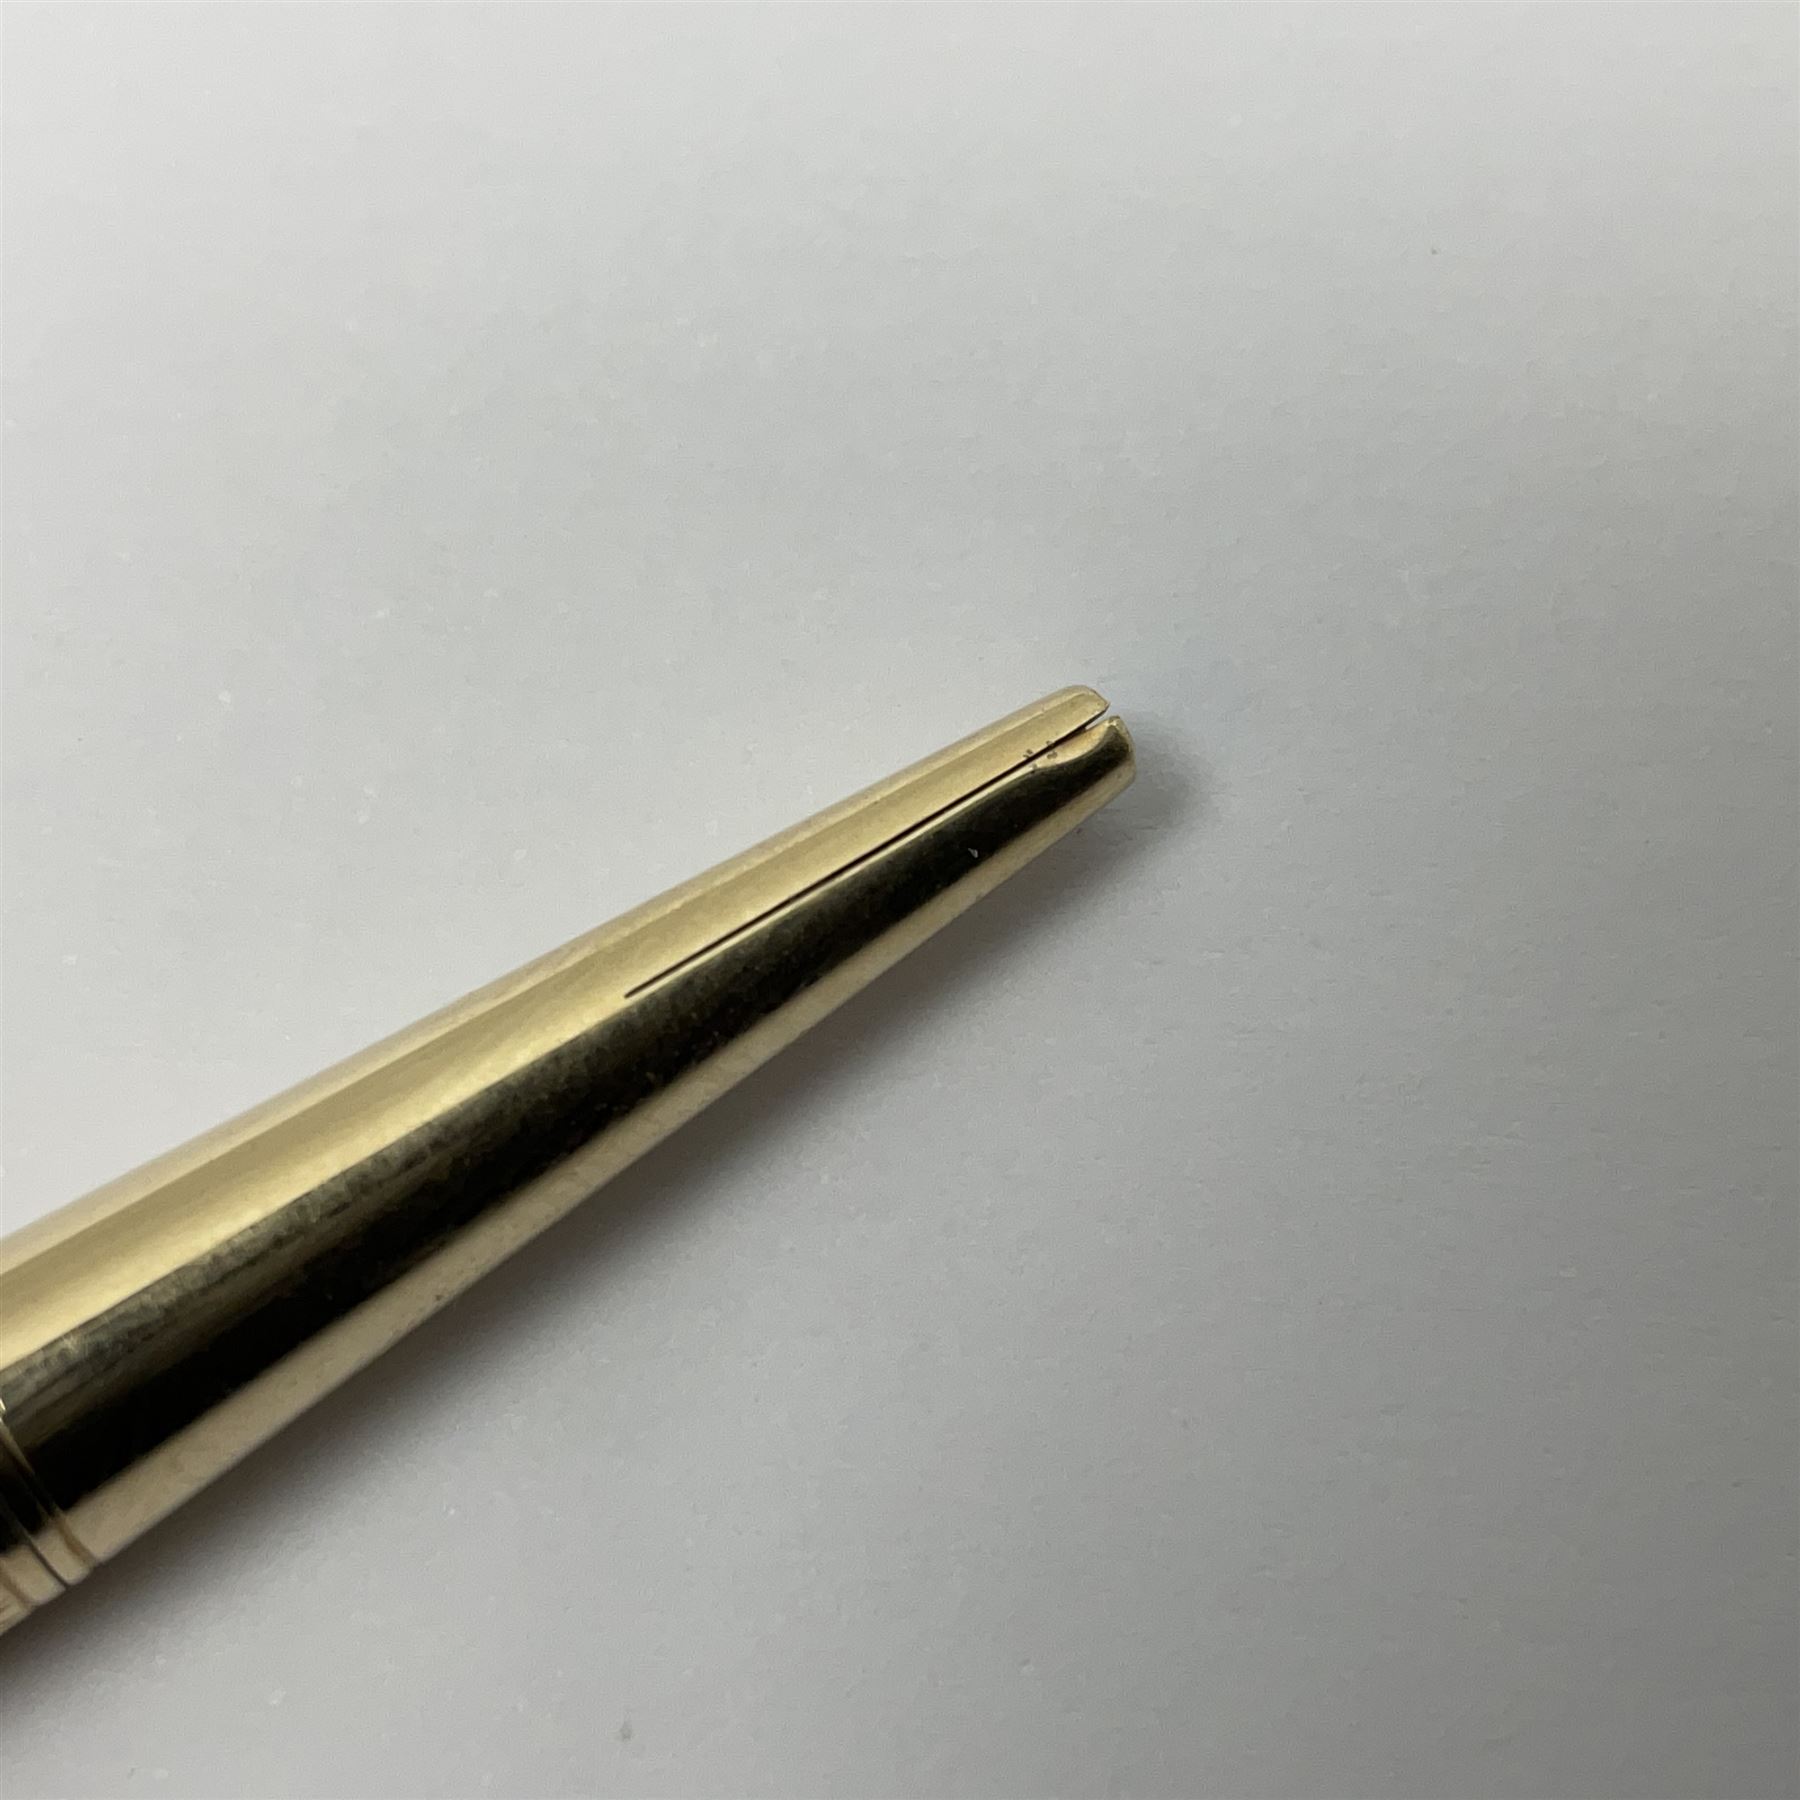 9ct gold propelling pencil - Image 4 of 9